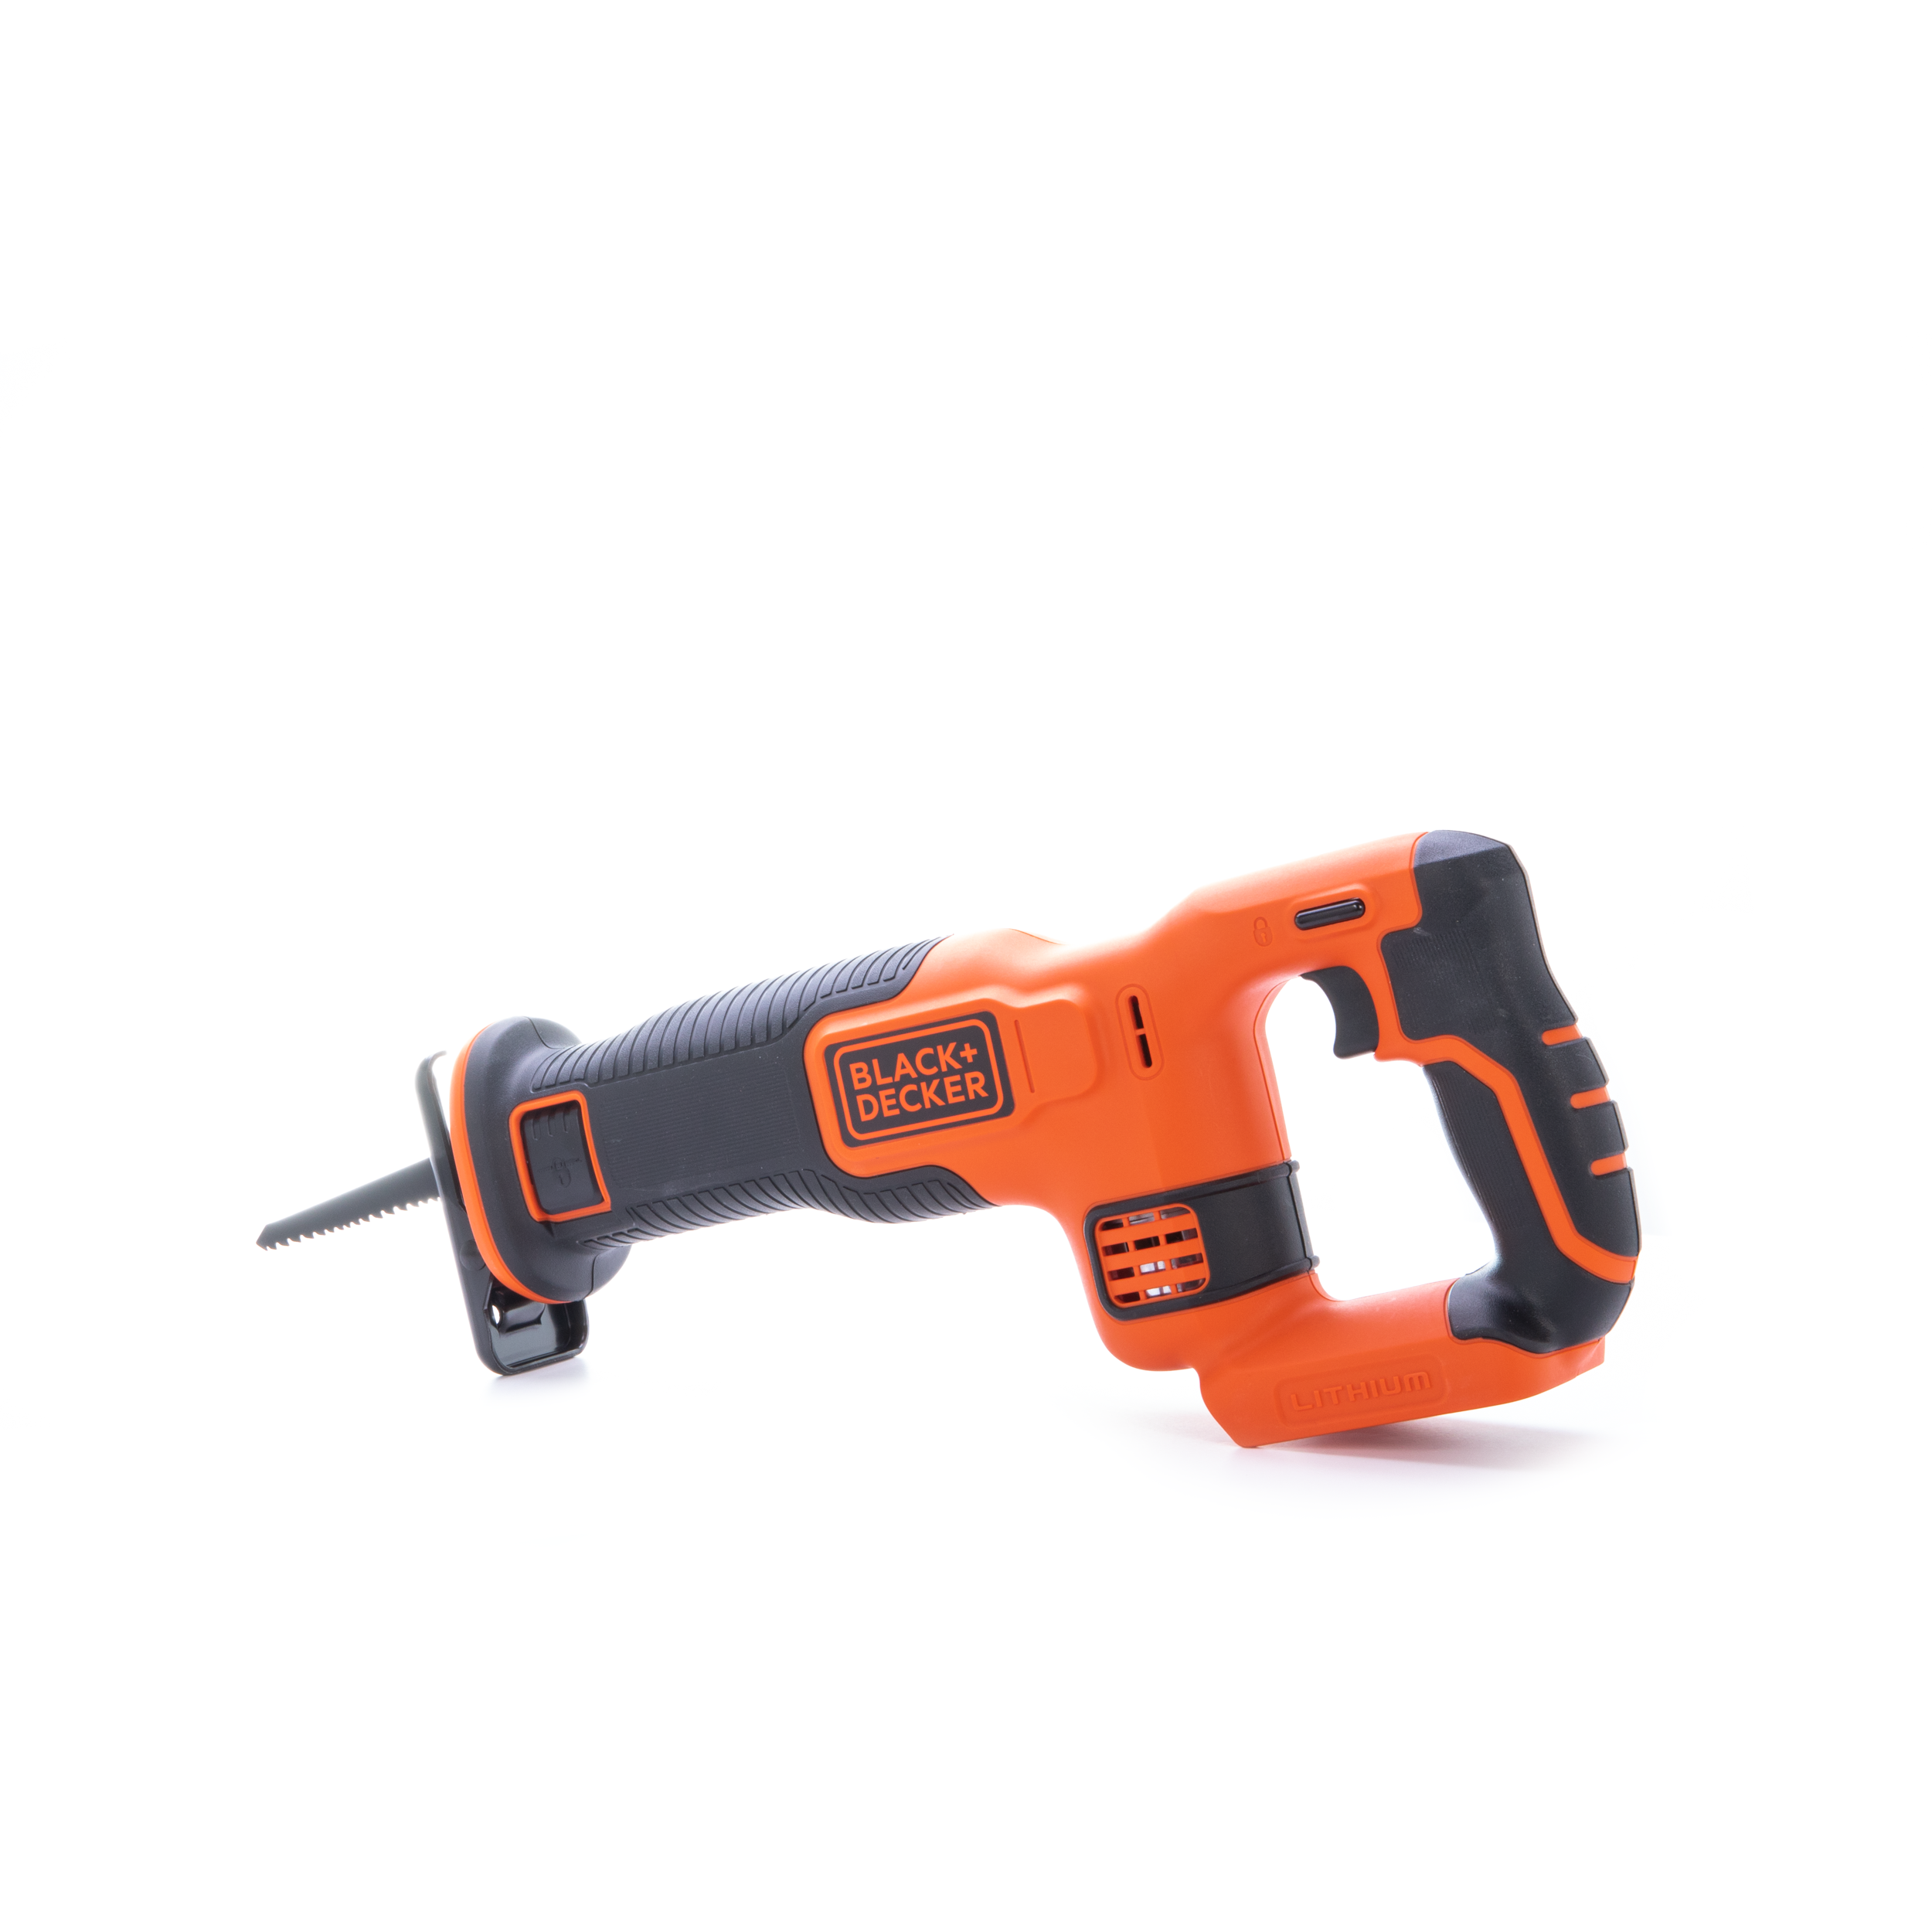 Black + Decker Corded Electric Reciprocating Saw RS600 With Case